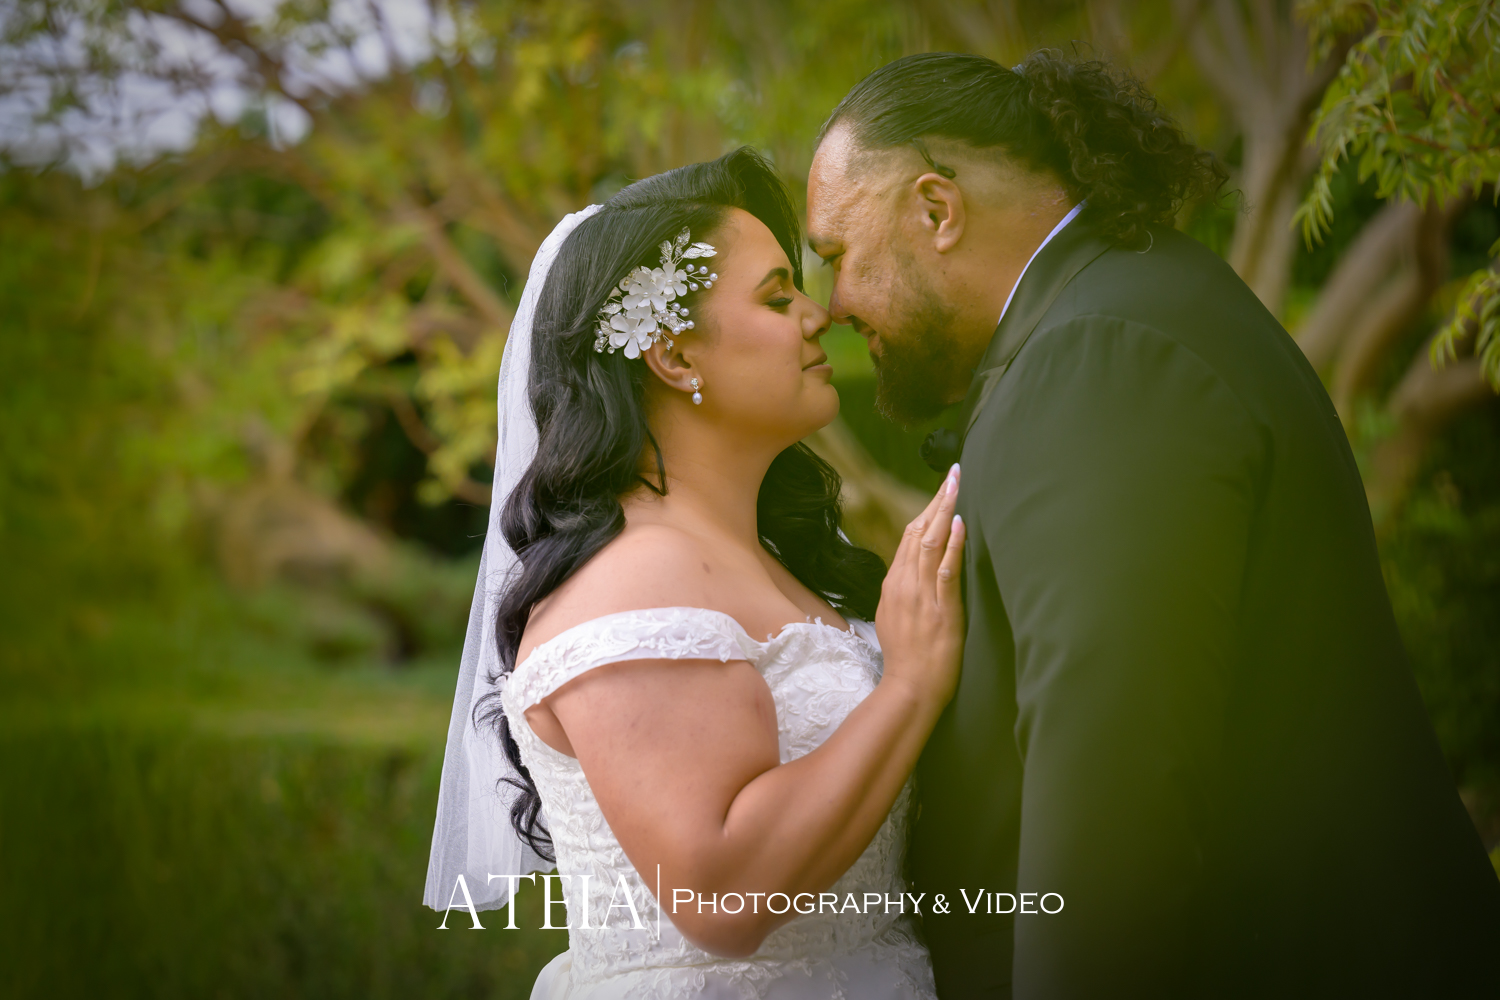 , Zera and Patrick&#8217;s wedding photography at Windmill Gardens Plumpton captured by ATEIA Photography &#038; Video